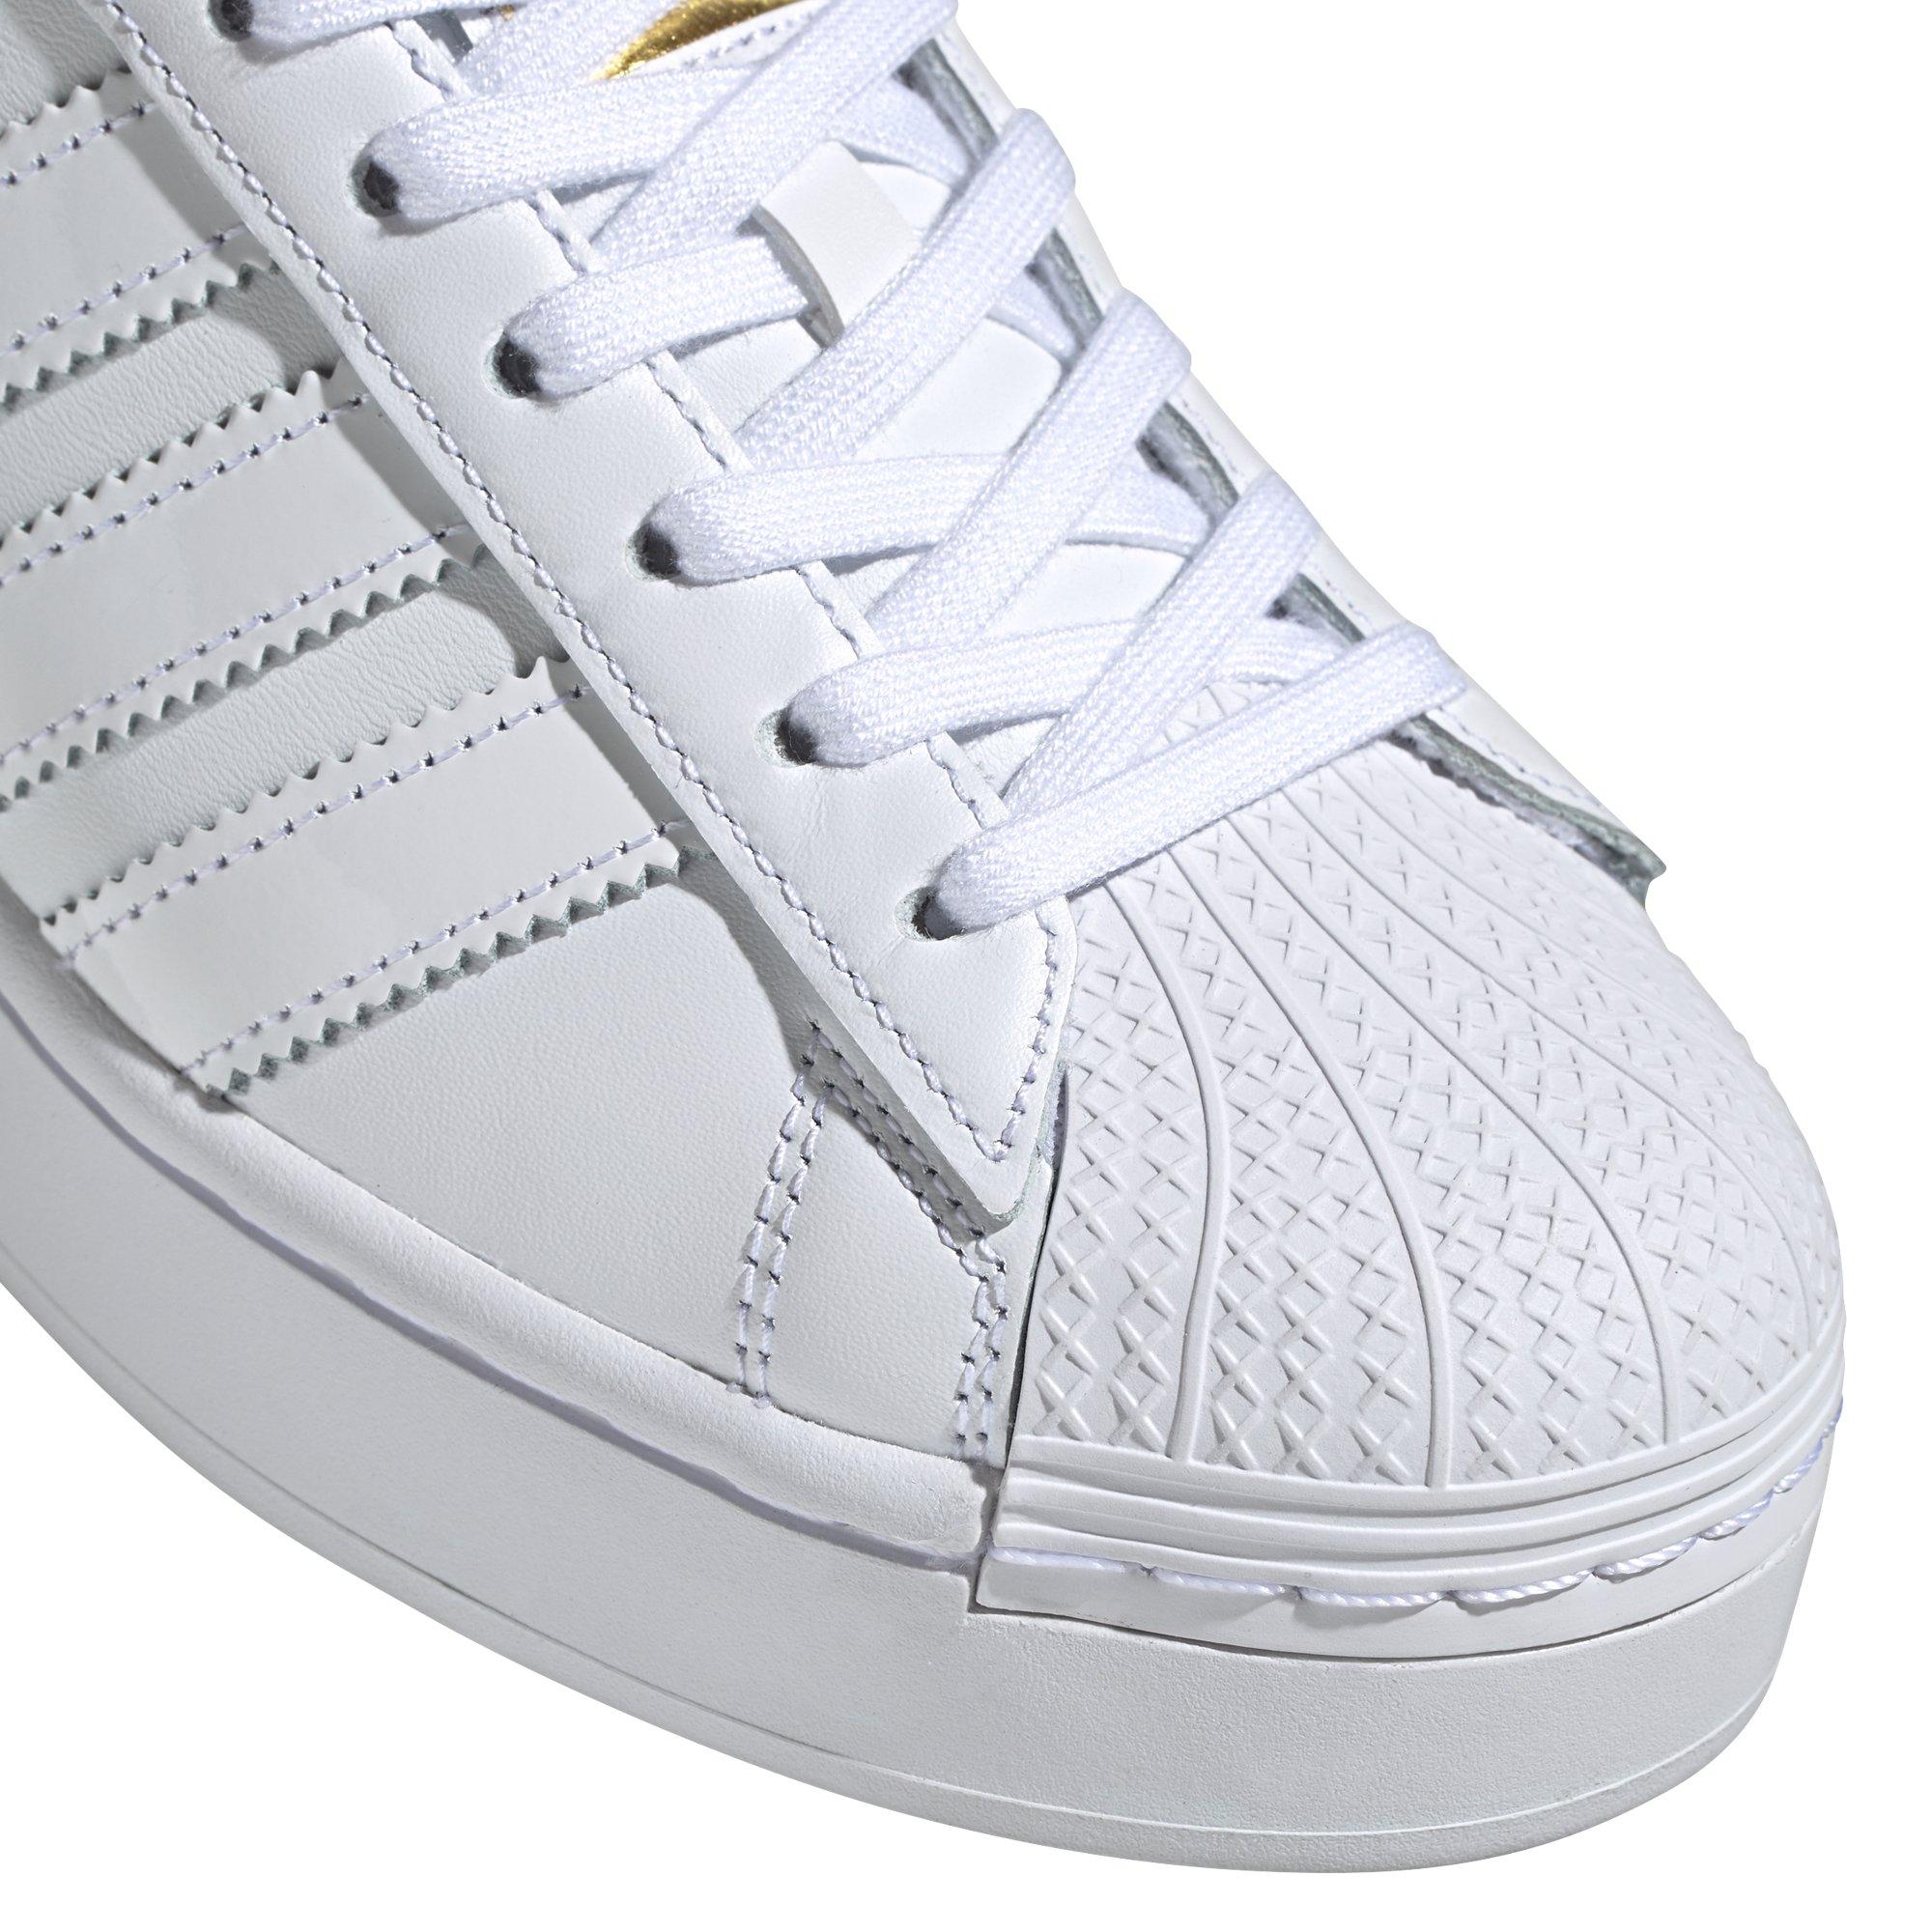 adidas superstar womens gold and white